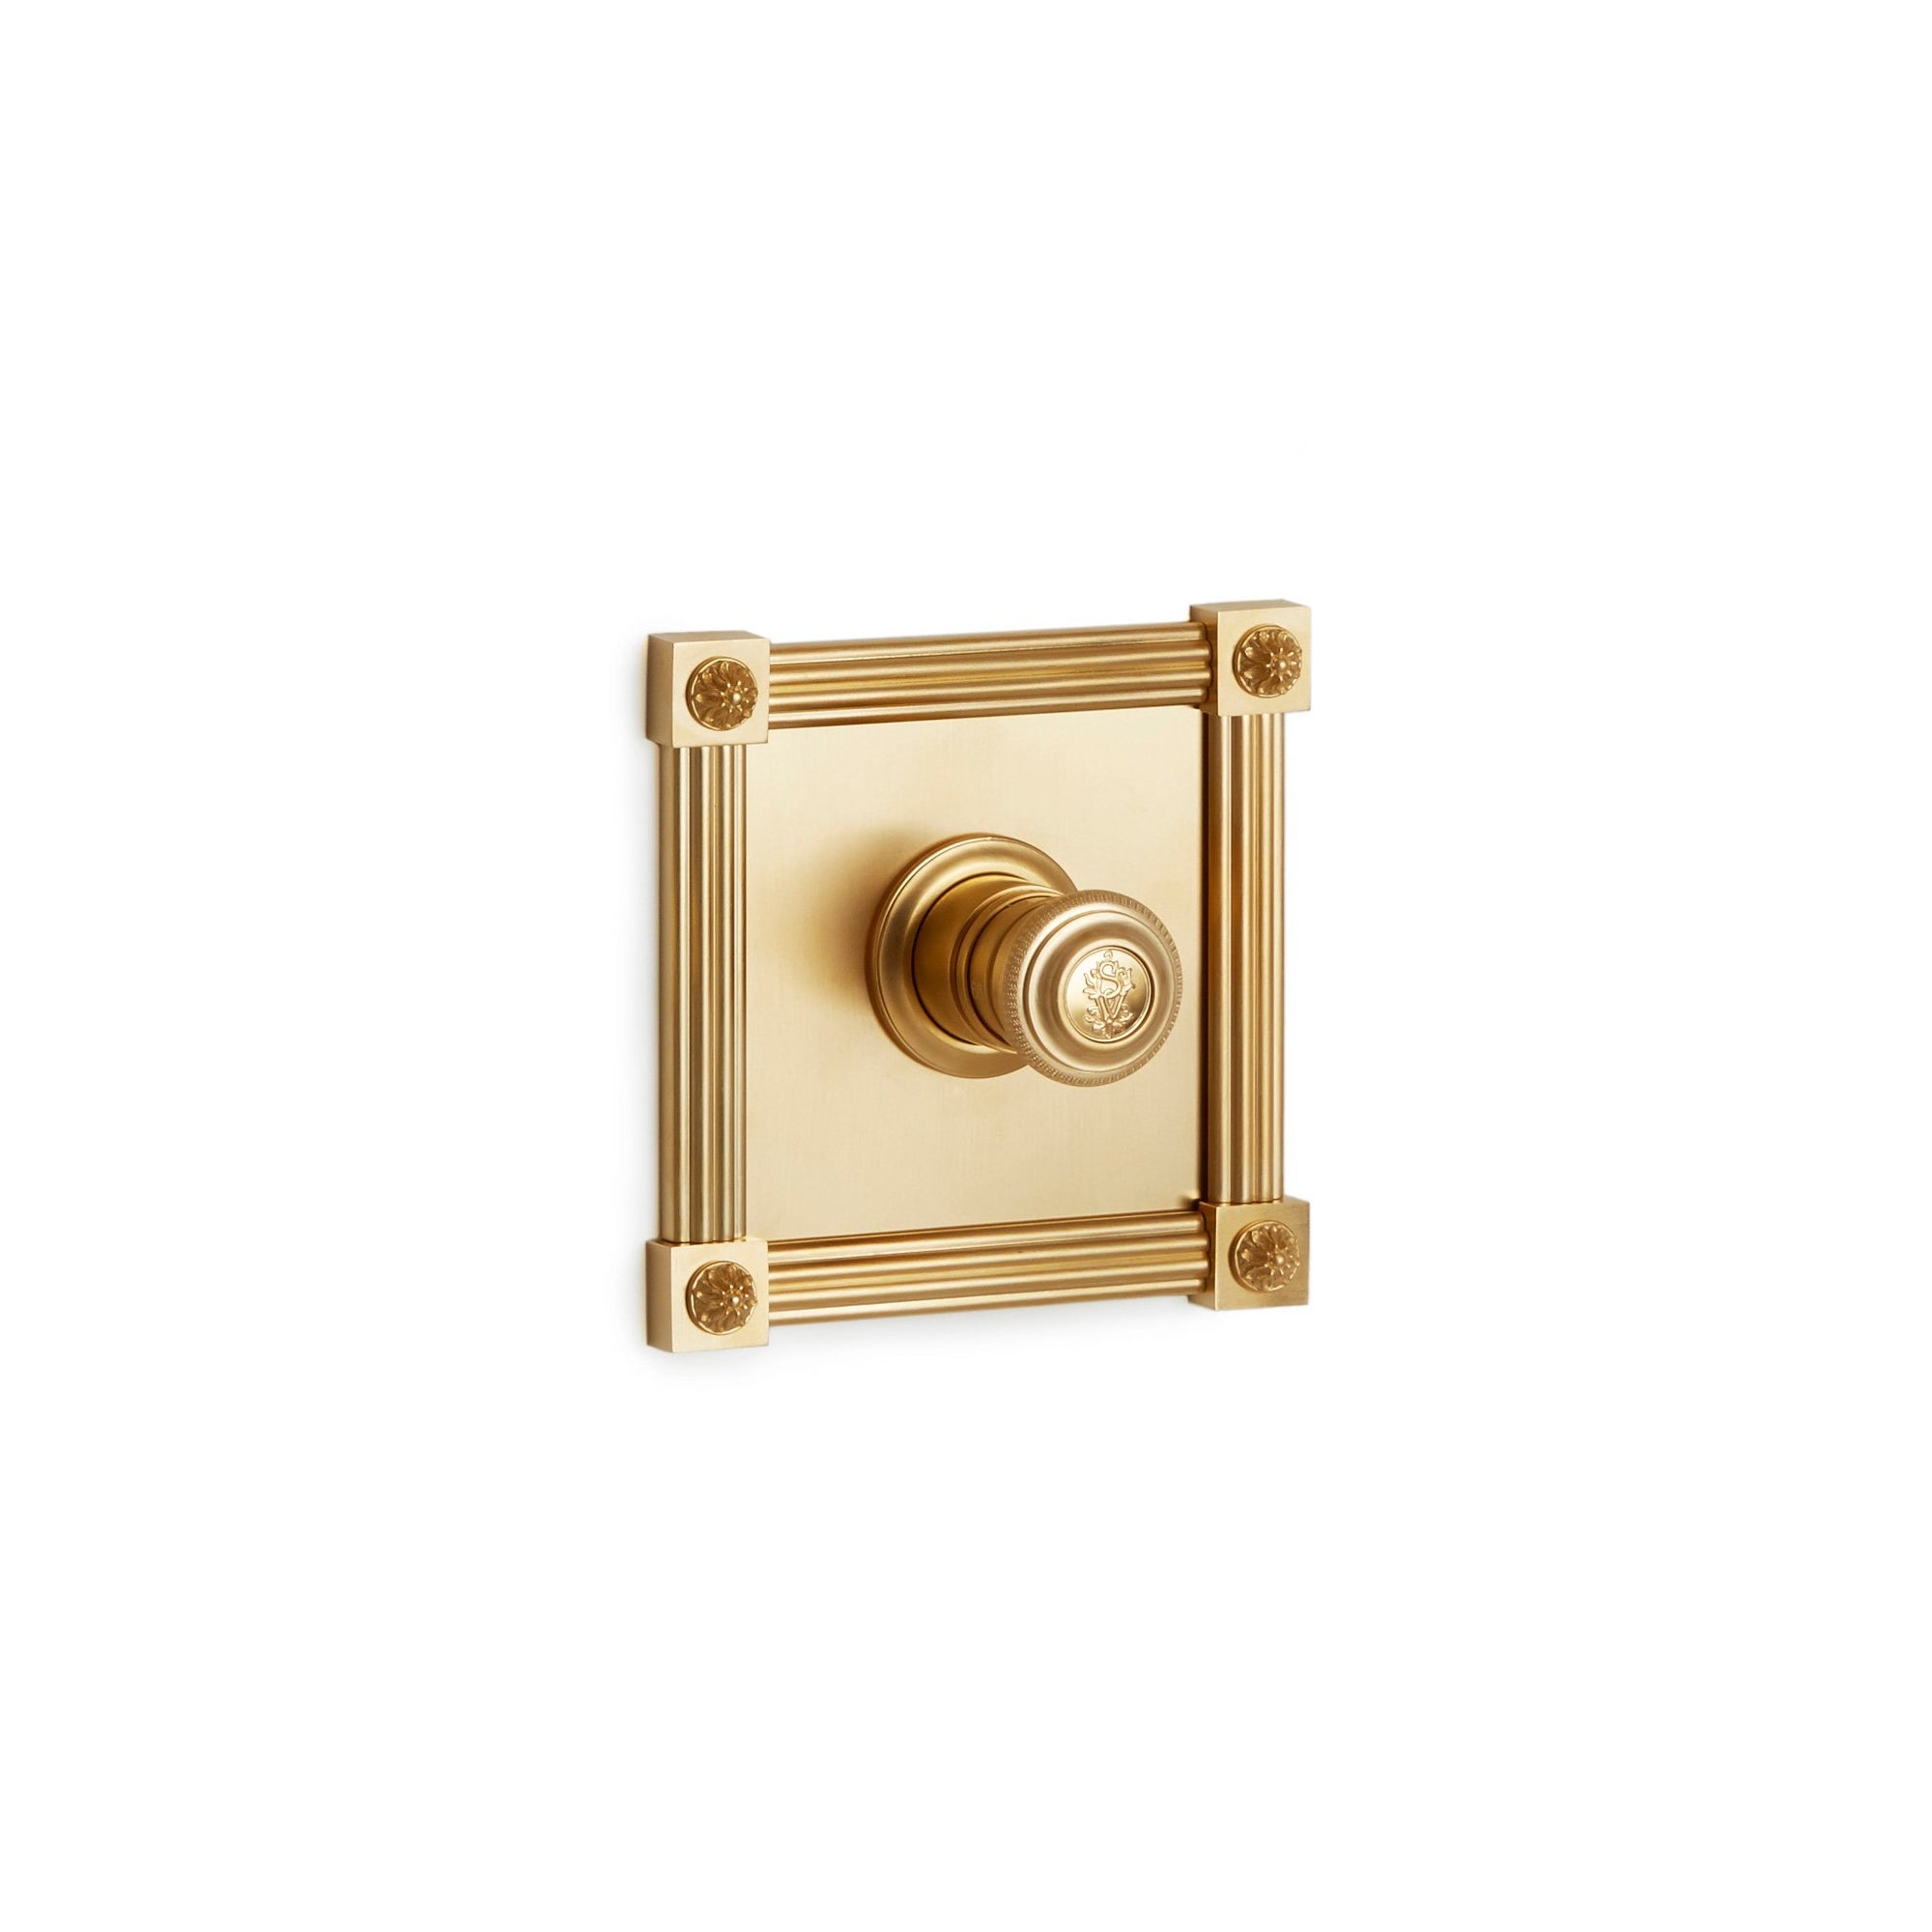 TMO06KN-LOGO-GP Sherle Wagner International Reeded Rosette High Flow Thermostatic Trim in Gold Plate metal finish